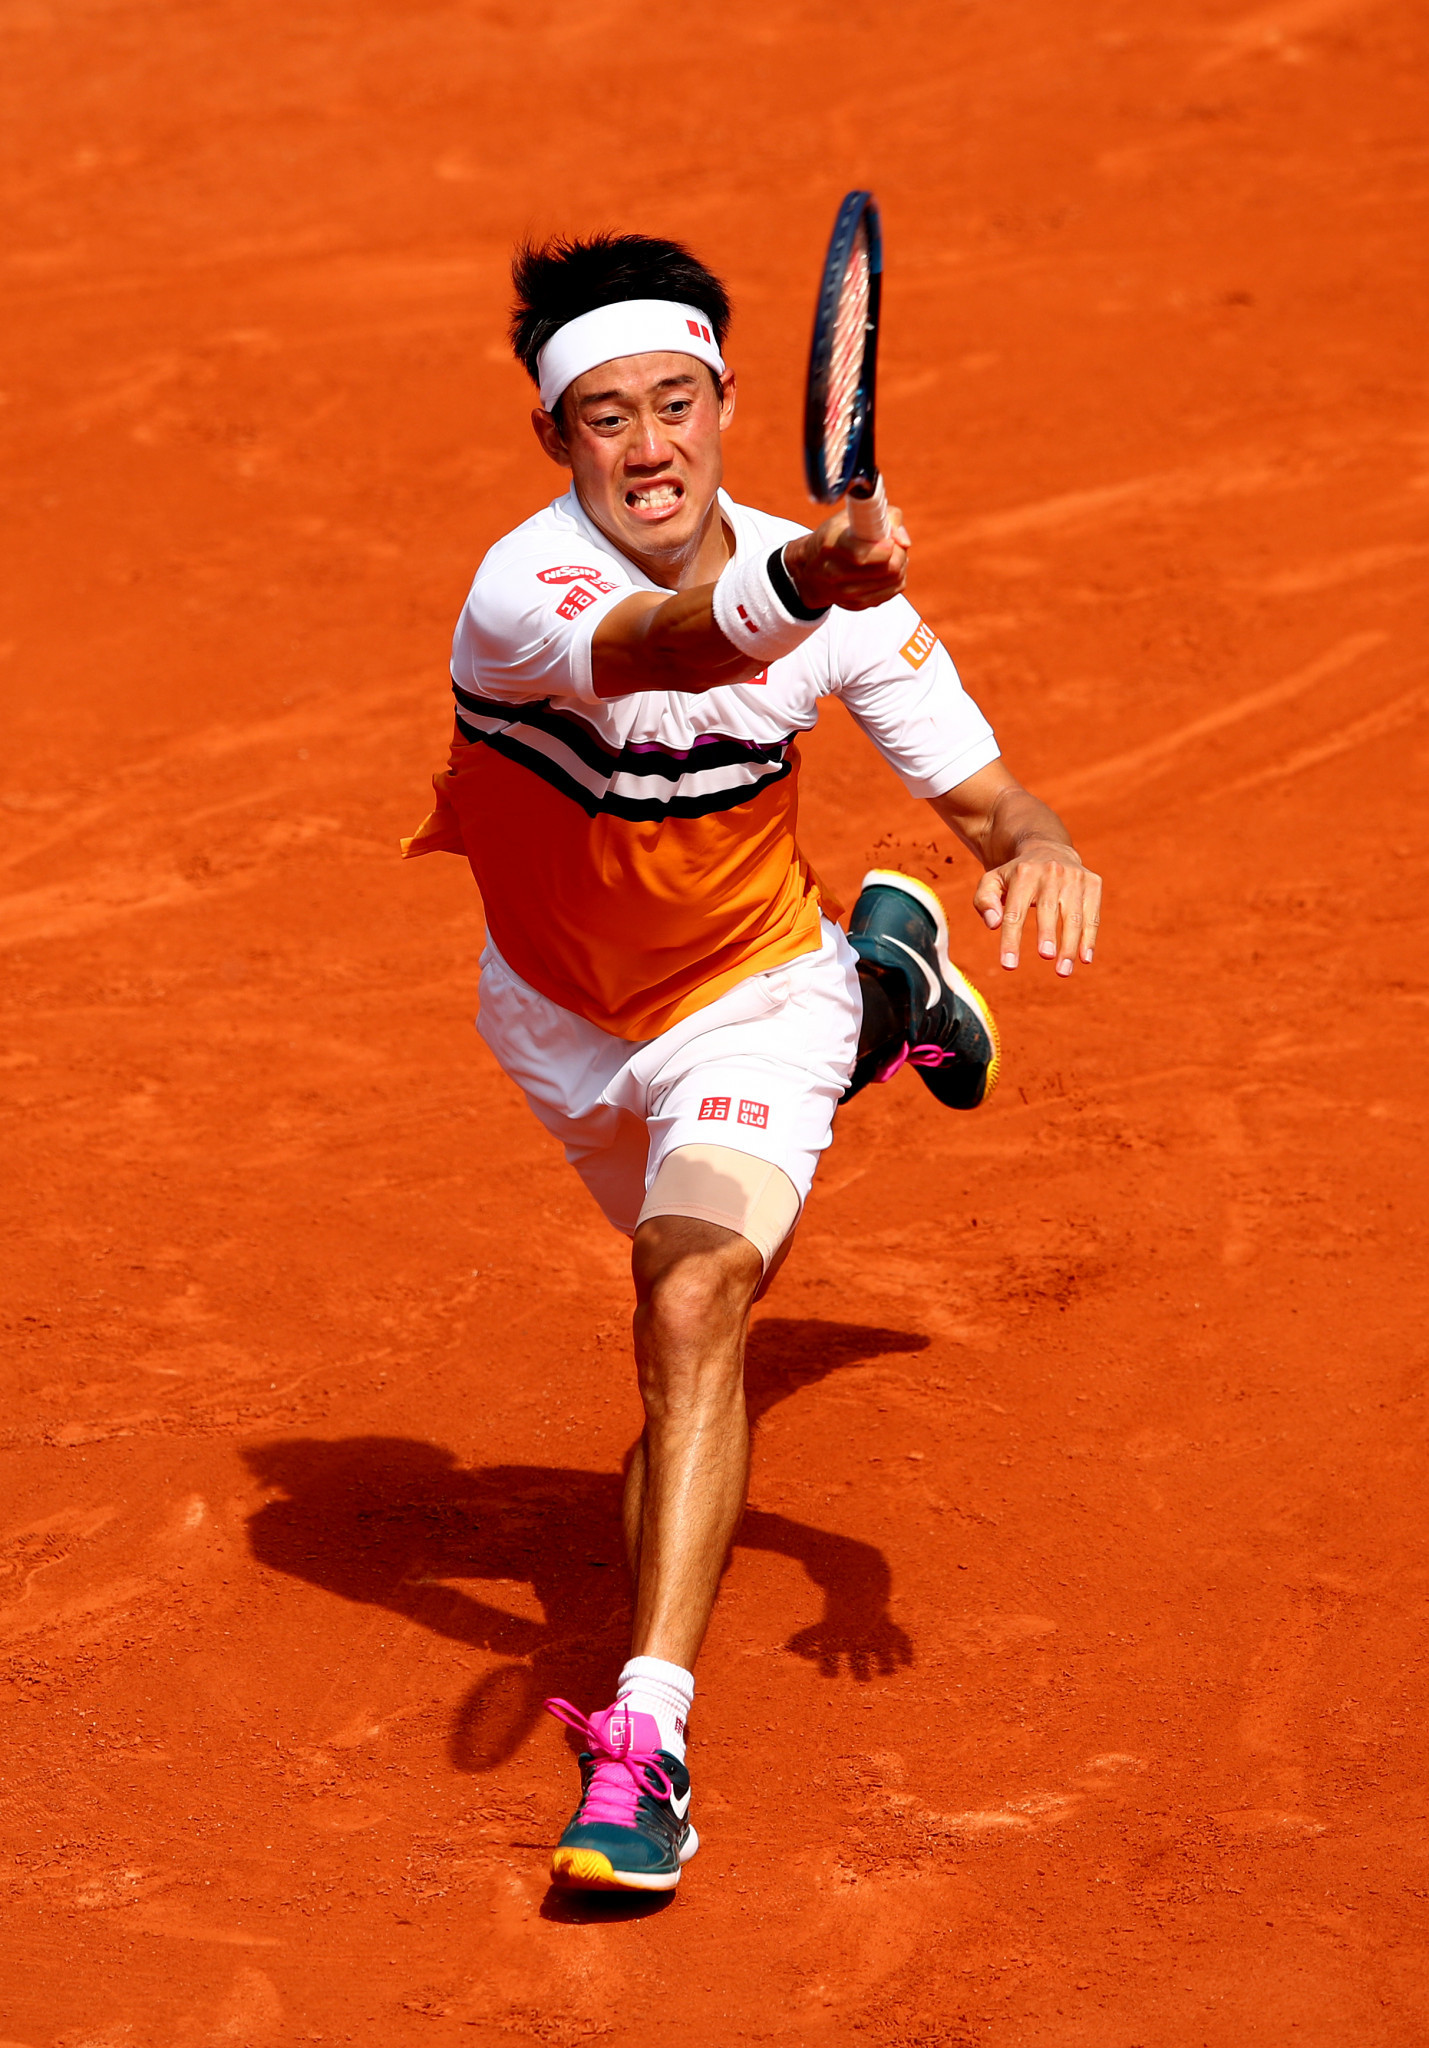 Seventh seed Nishikori used all of his top ranking experience to see off the big-hitting Đere ©Getty Images